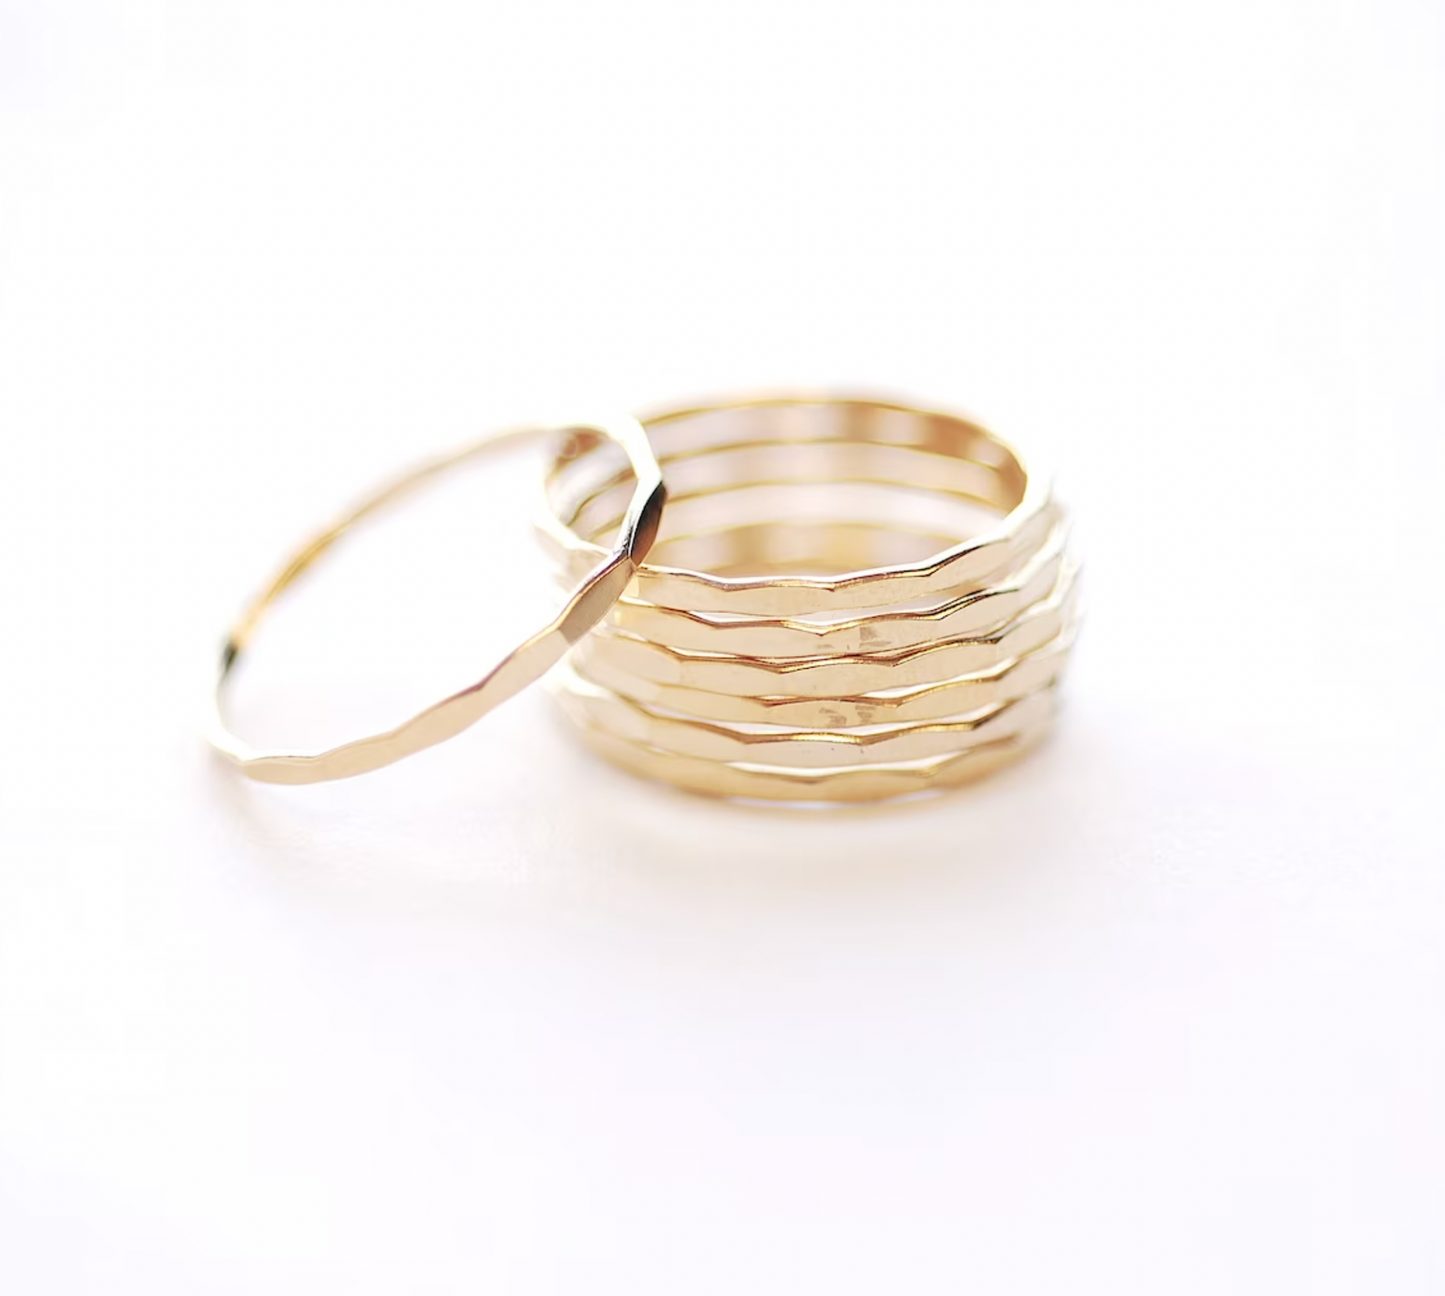 GOLD HAMMERED STACKING RING